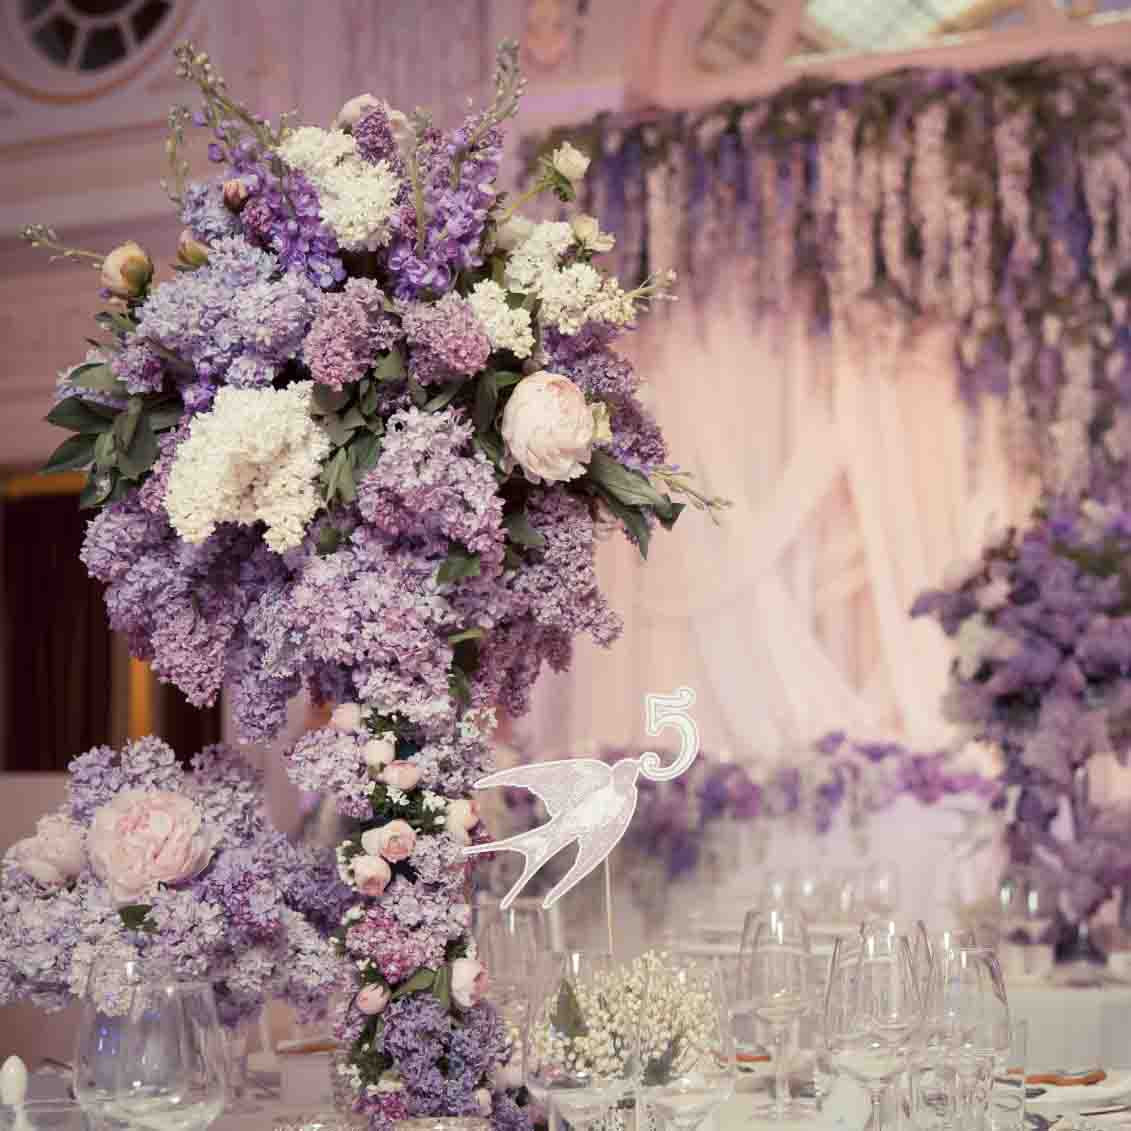 How Much To Spend On Wedding Flowers
 How much did you spend on flowers for your wedding Polls